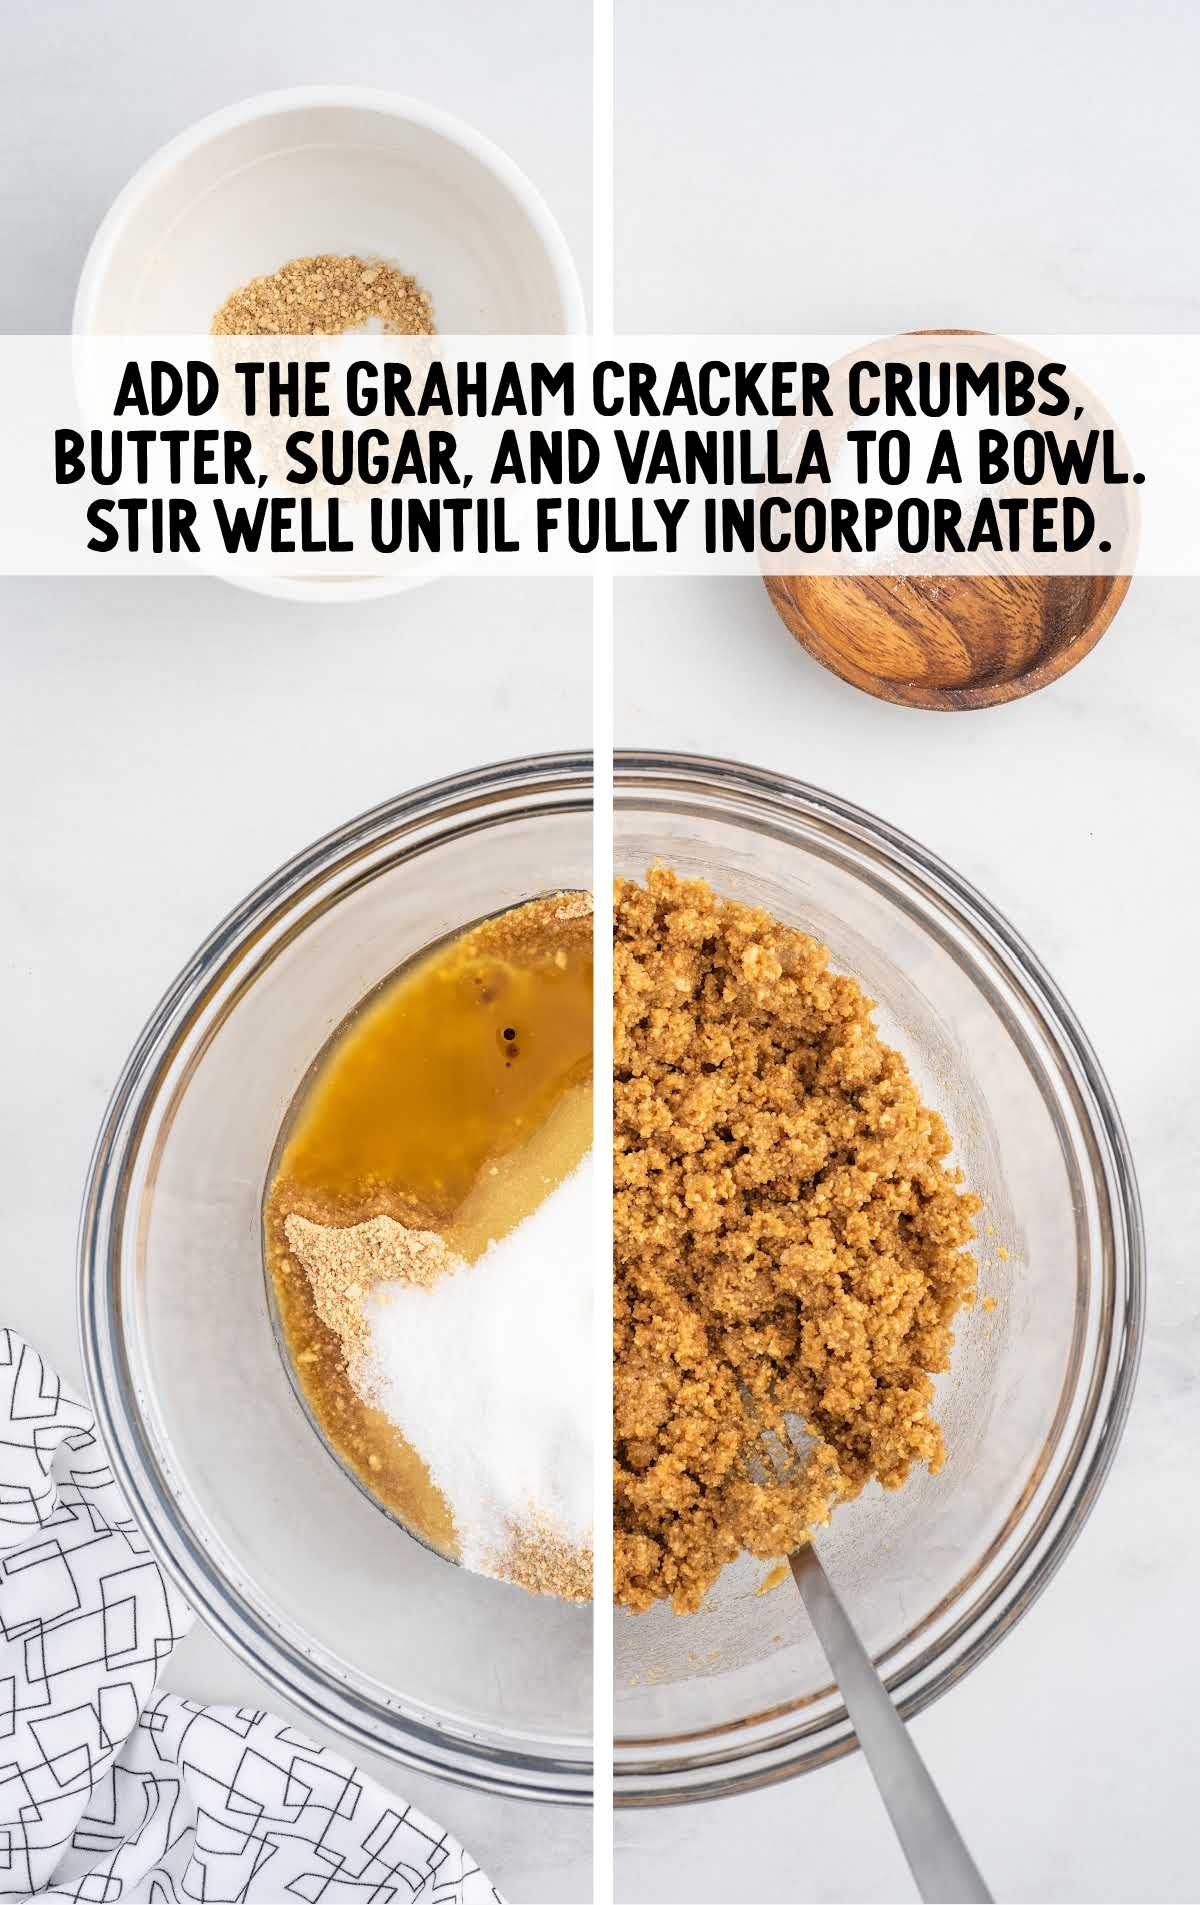 graham crackers crumbs, butter, sugar, and vanilla added to a bowl